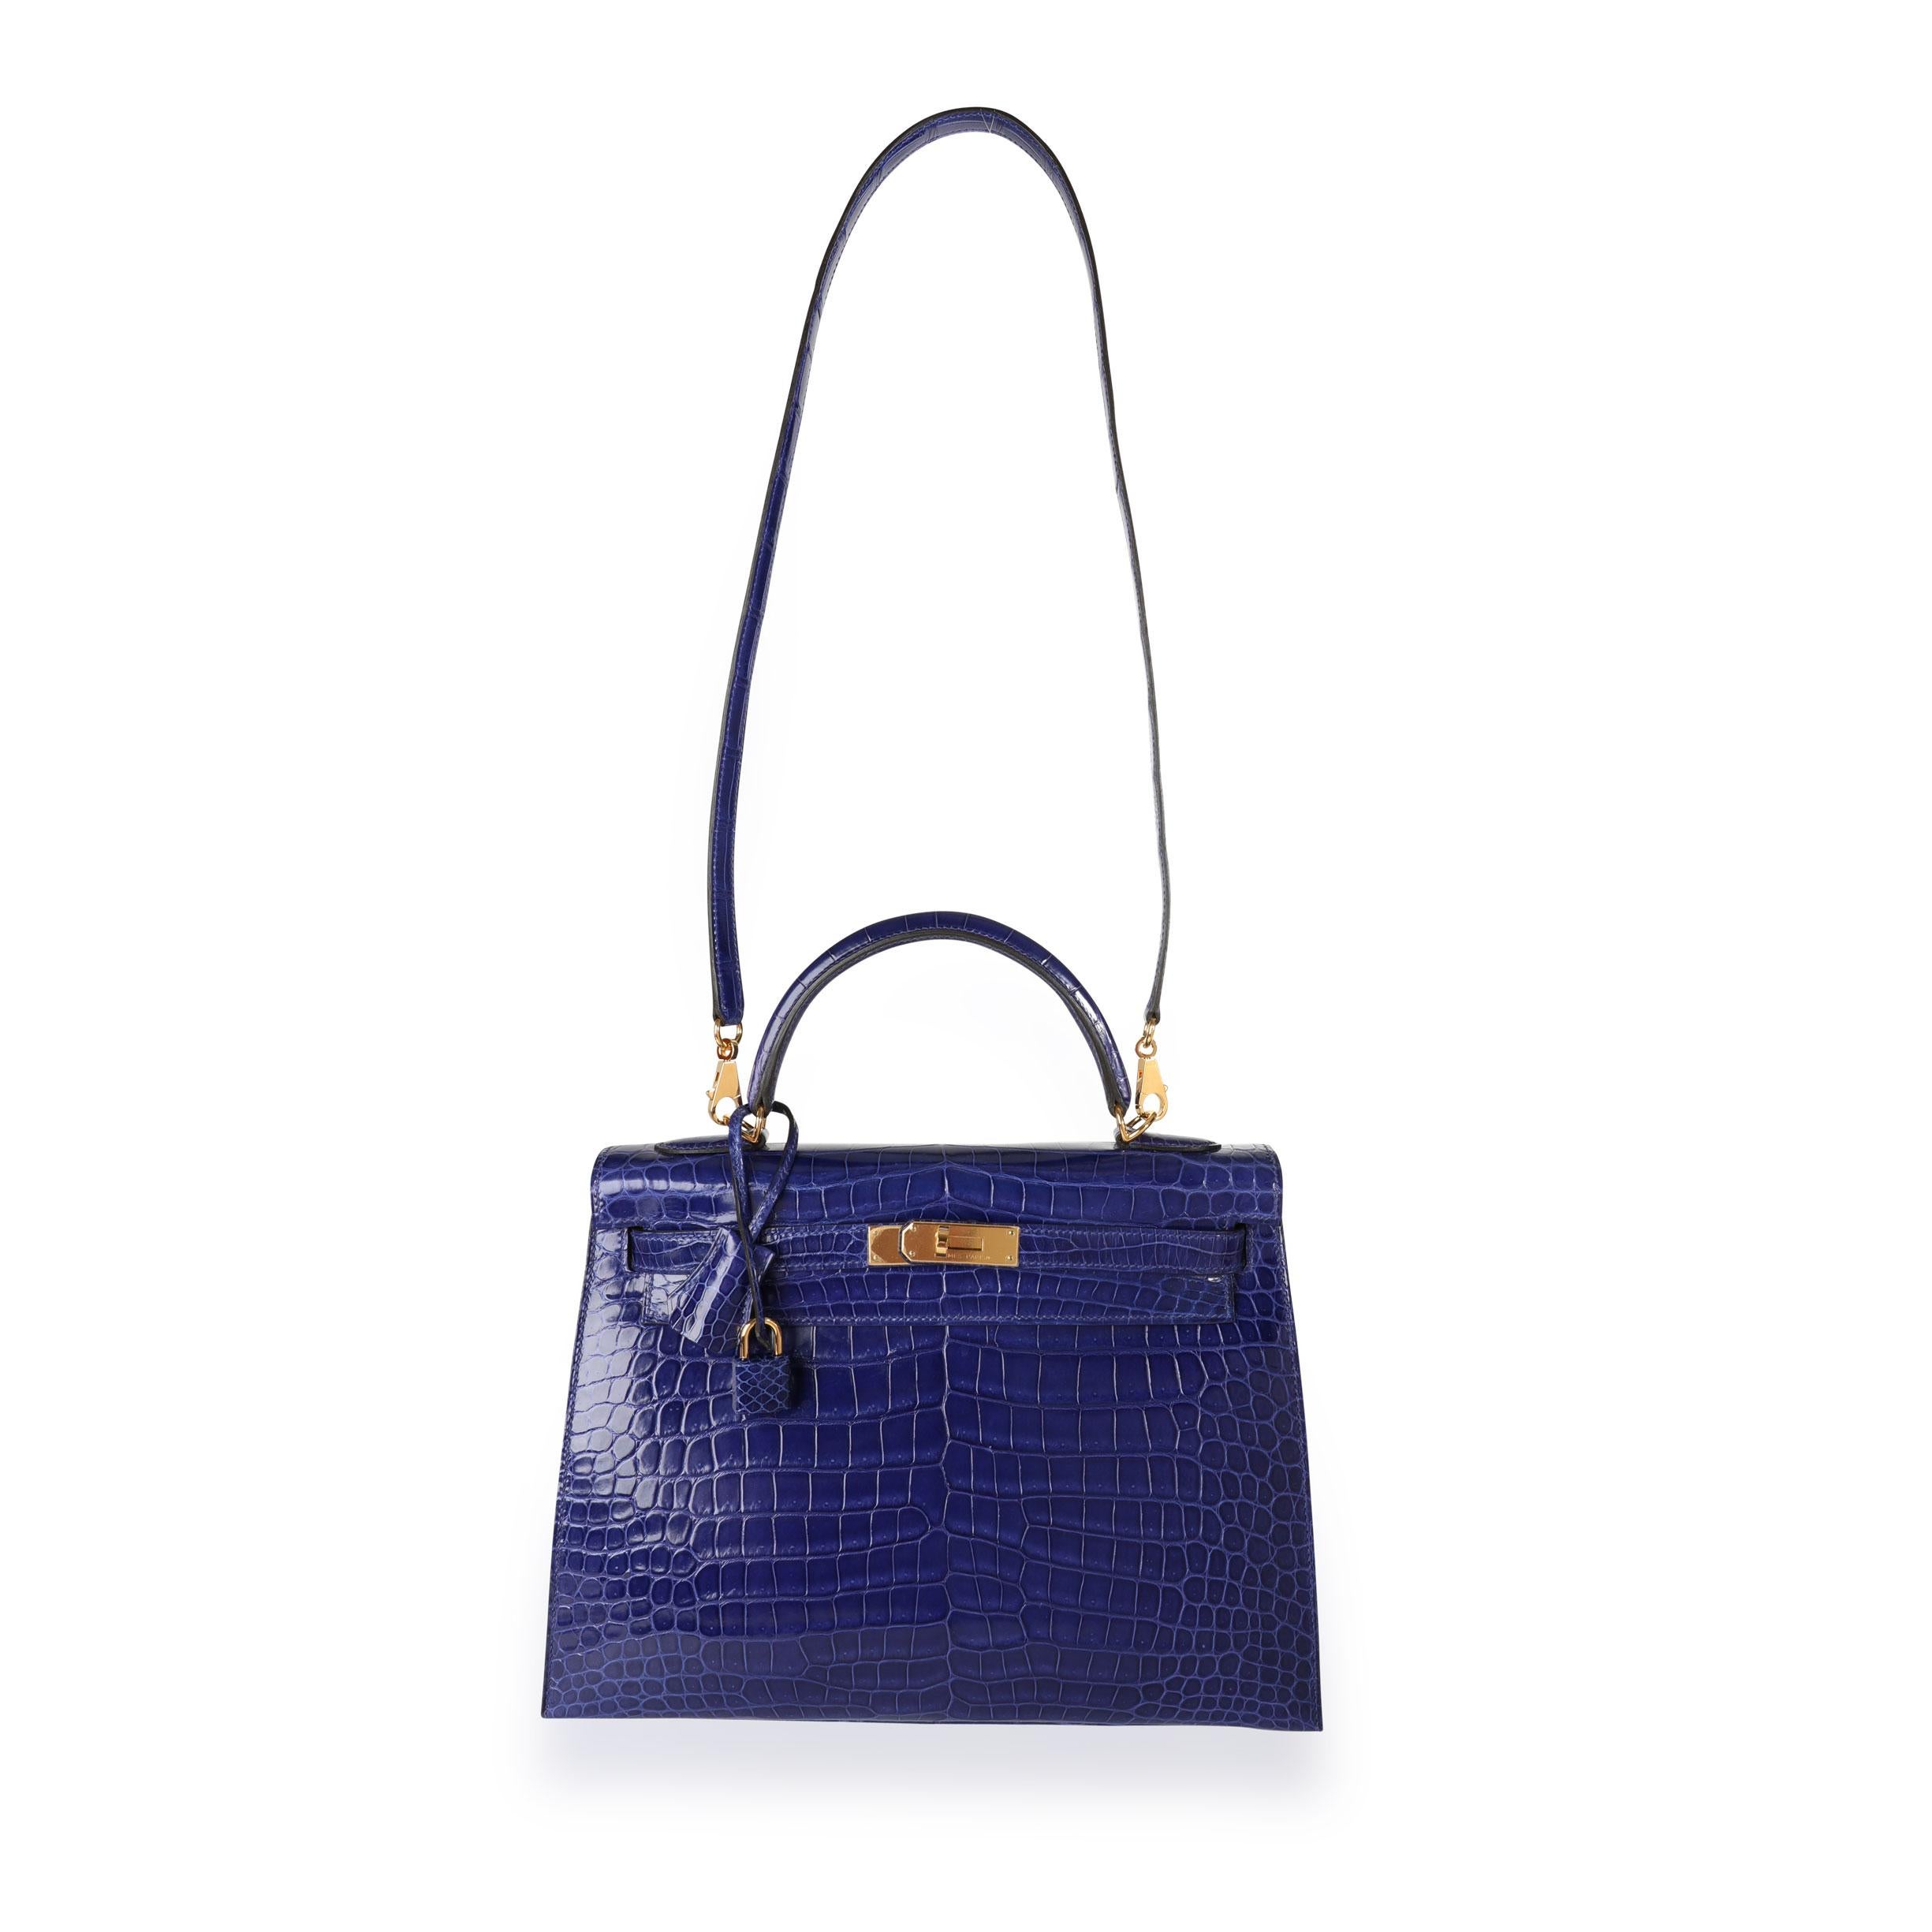 Hermès Bleu Électrique Shiny Porosus Crocodile Sellier Kelly 32 GHW
SKU: 110781

Handbag Condition: Very Good
Condition Comments: Very Good Condition. Plastic on most hardware. Light marks to skin. Please note: this item can not be shipped to all